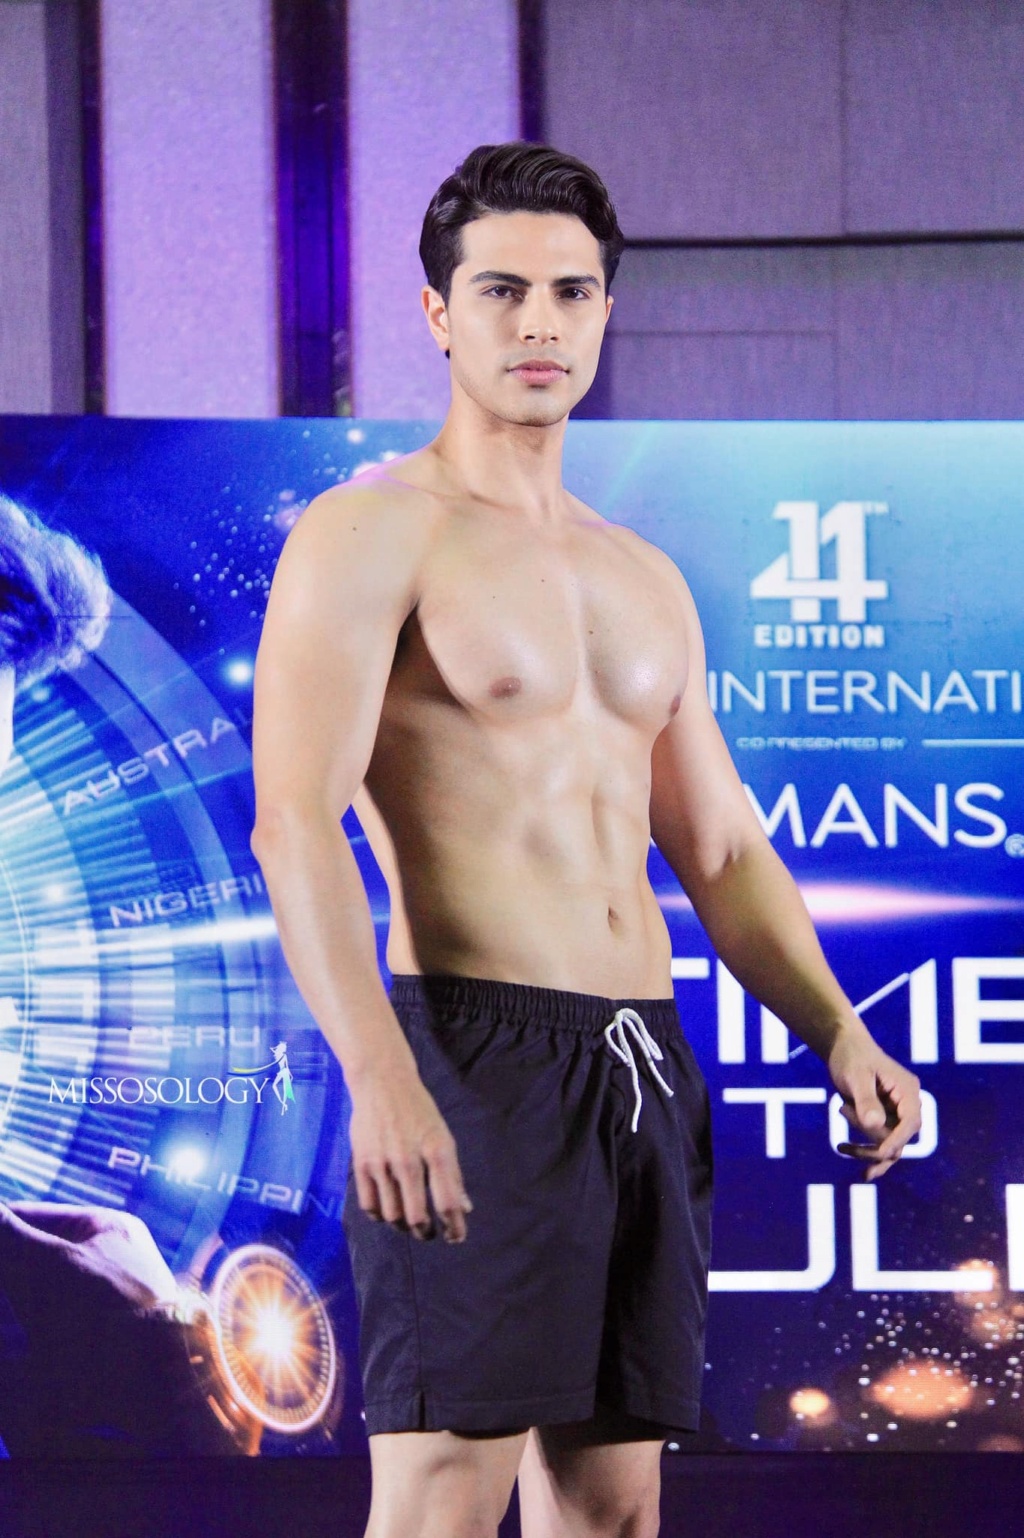 14th Mister International in Manila, Philippines - Oct 30th, 2022 - Winner is Dominican Republic 31208910